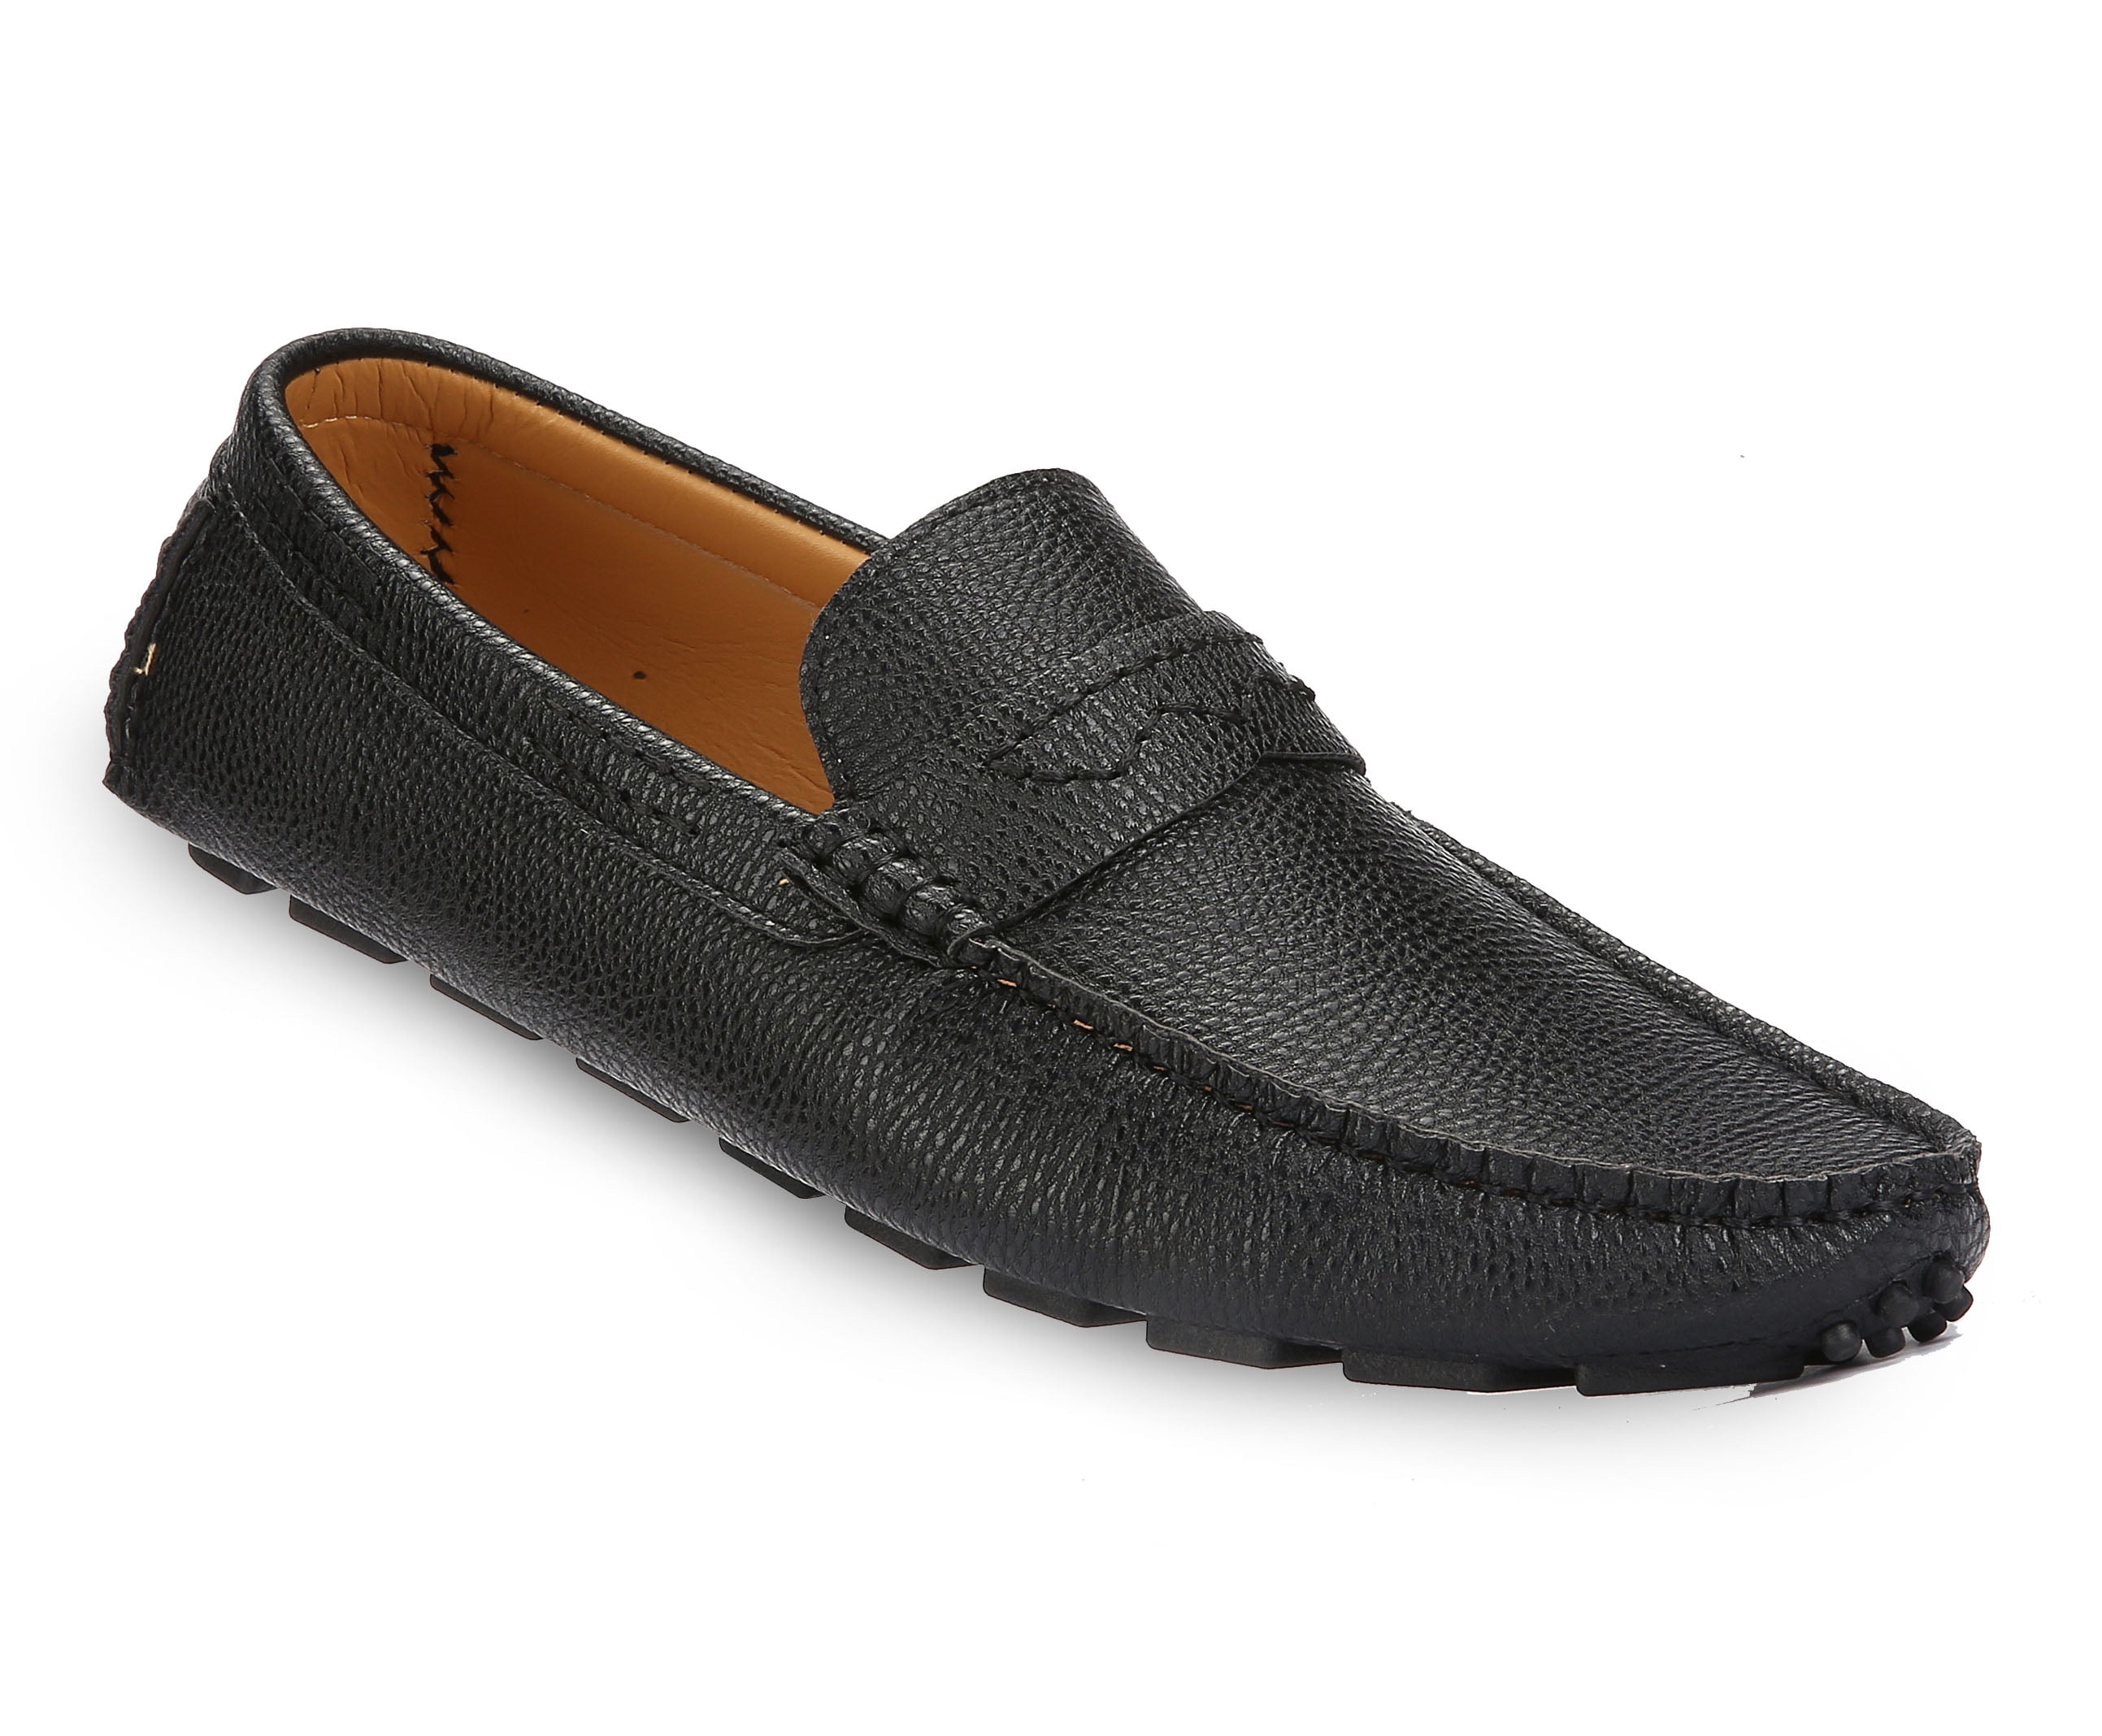 Mio Marino Men's Casually Suave Leather Penny Loafers - Walmart.com